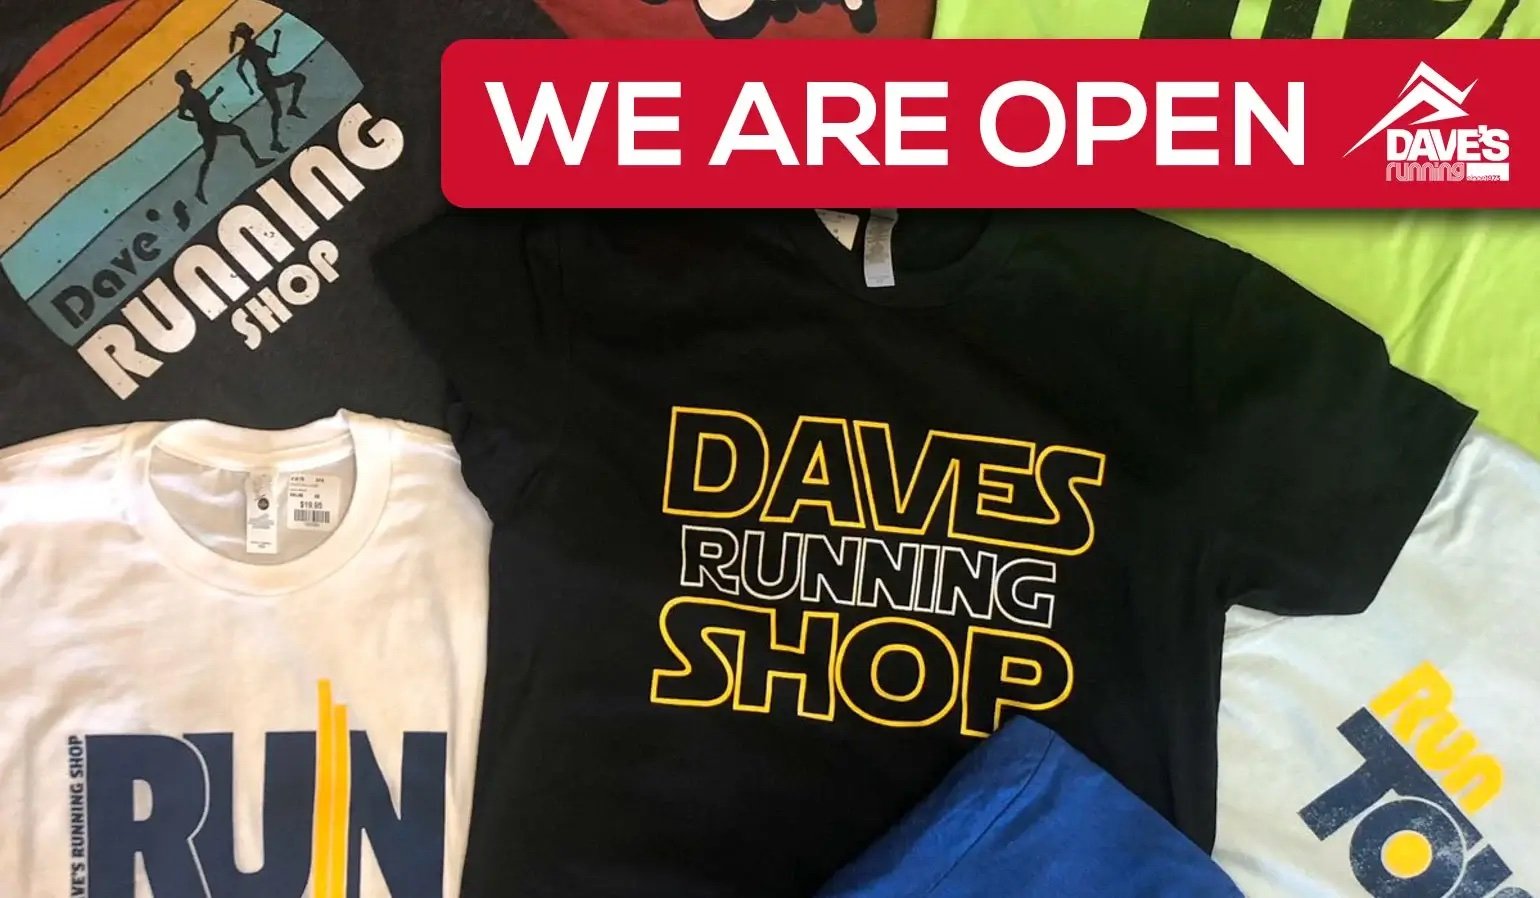 Dave's Running We Are Open Image